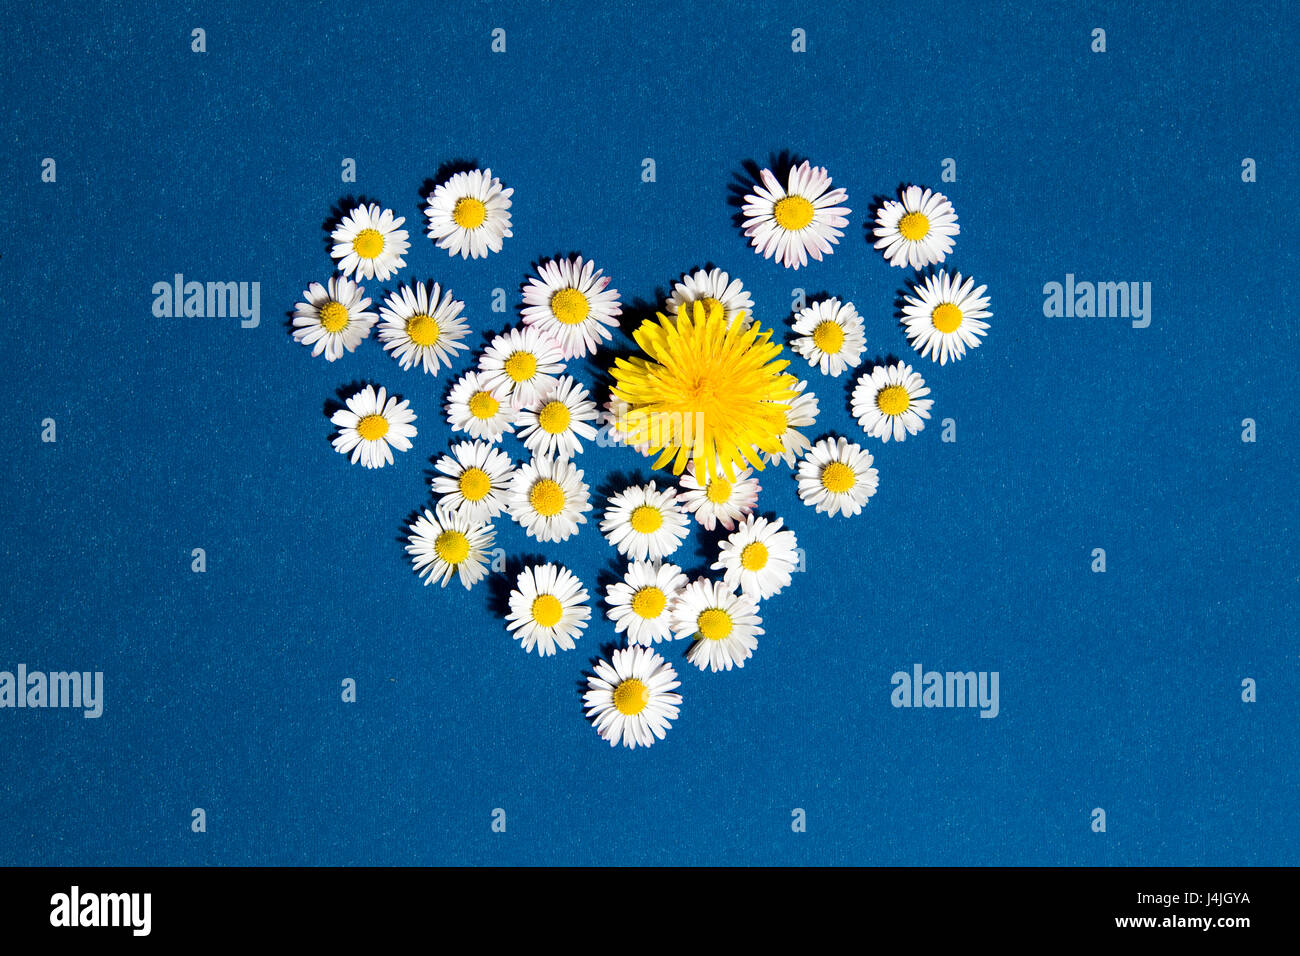 Heart drawn with daisies and dandelion flower on a blue background Stock Photo